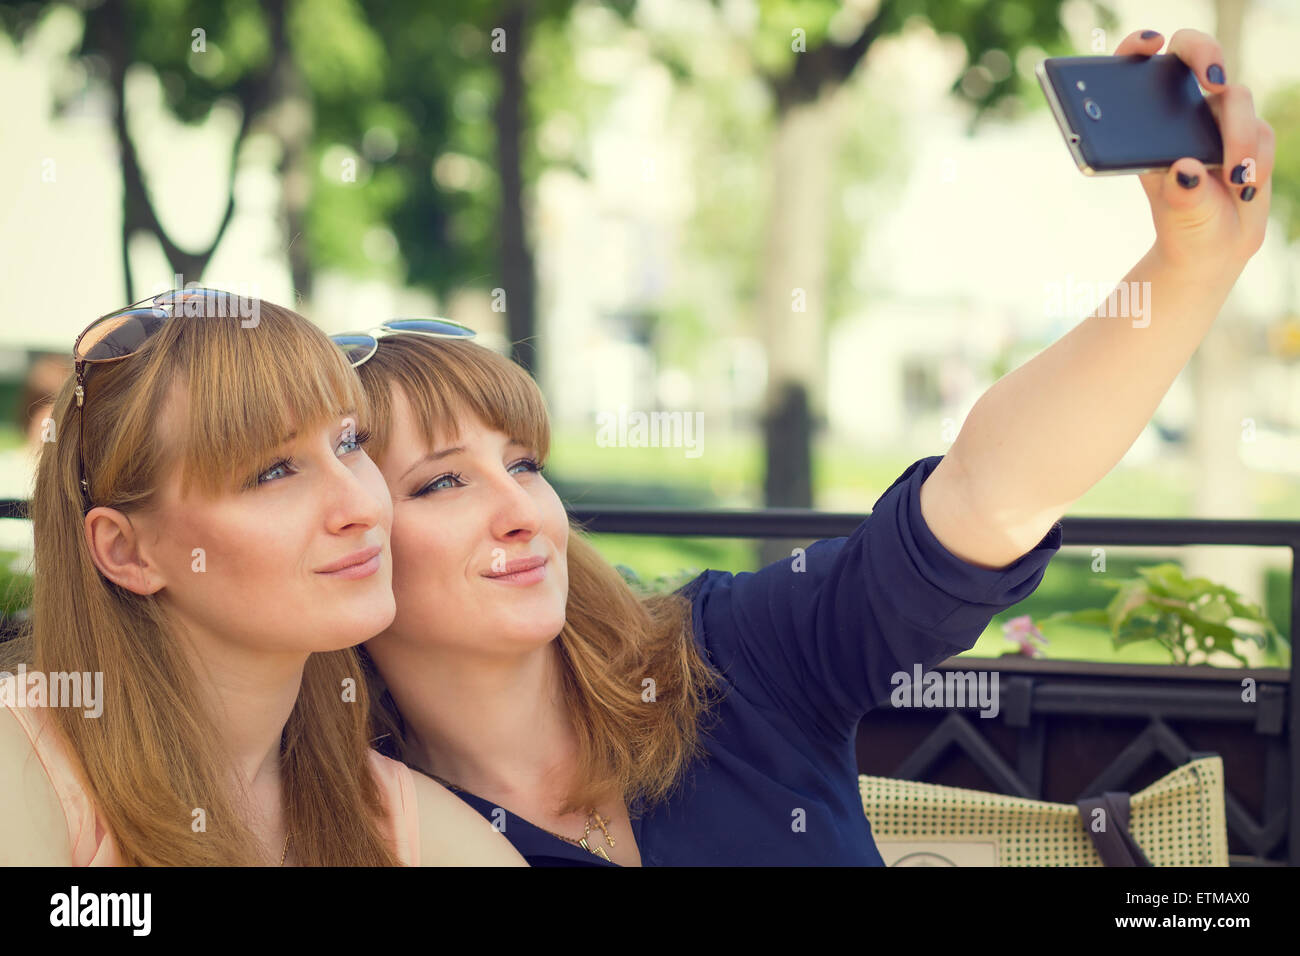 Twins Sisters Taking Selfie With Mobile Phone In A Restaurant Young